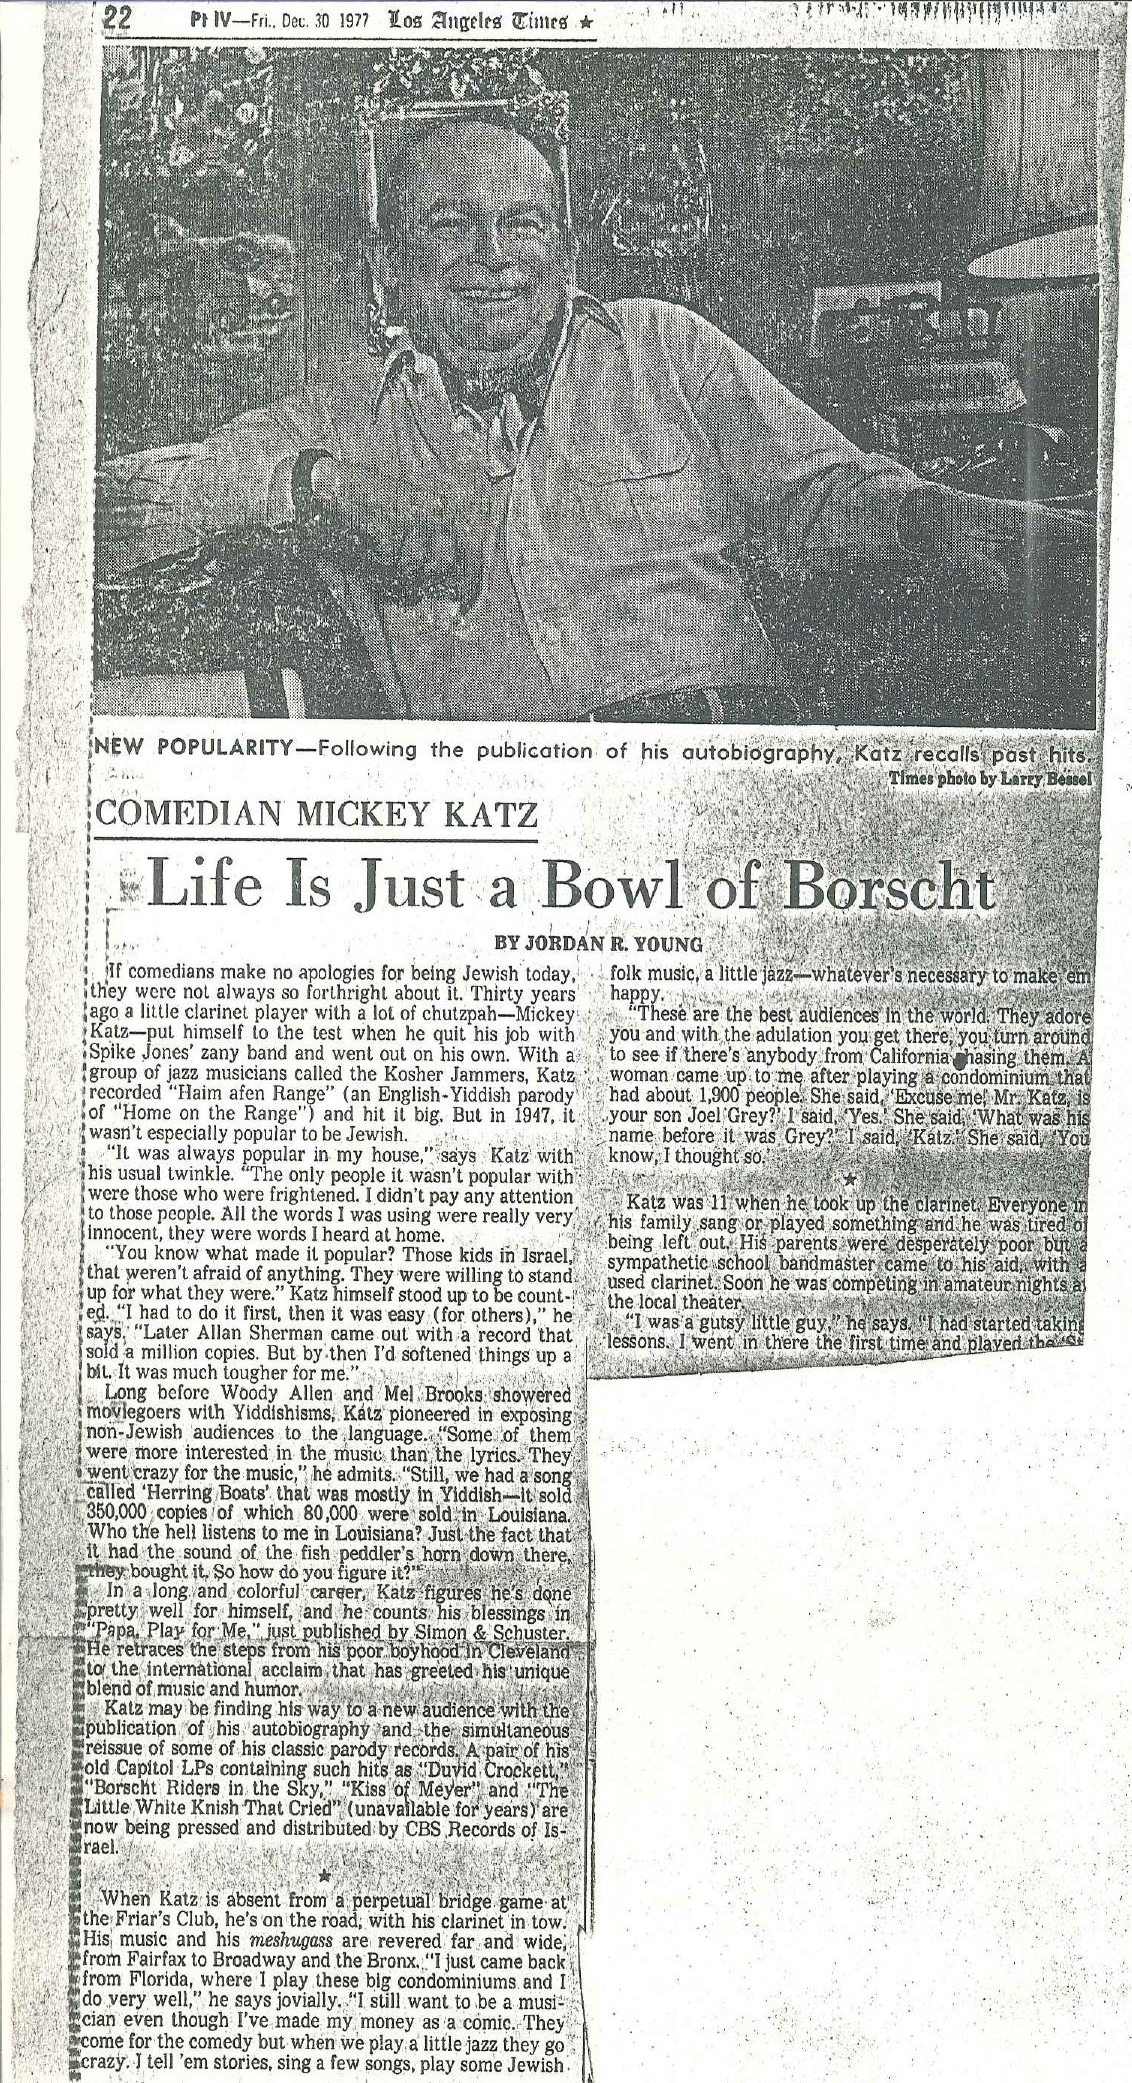 0021NC_Profile of M.Katz_Life is Just a Bowl of Borscht by Jordan Young, 12_30_77 in LA Times. Maybe related to NC21 and NC17_Clippings